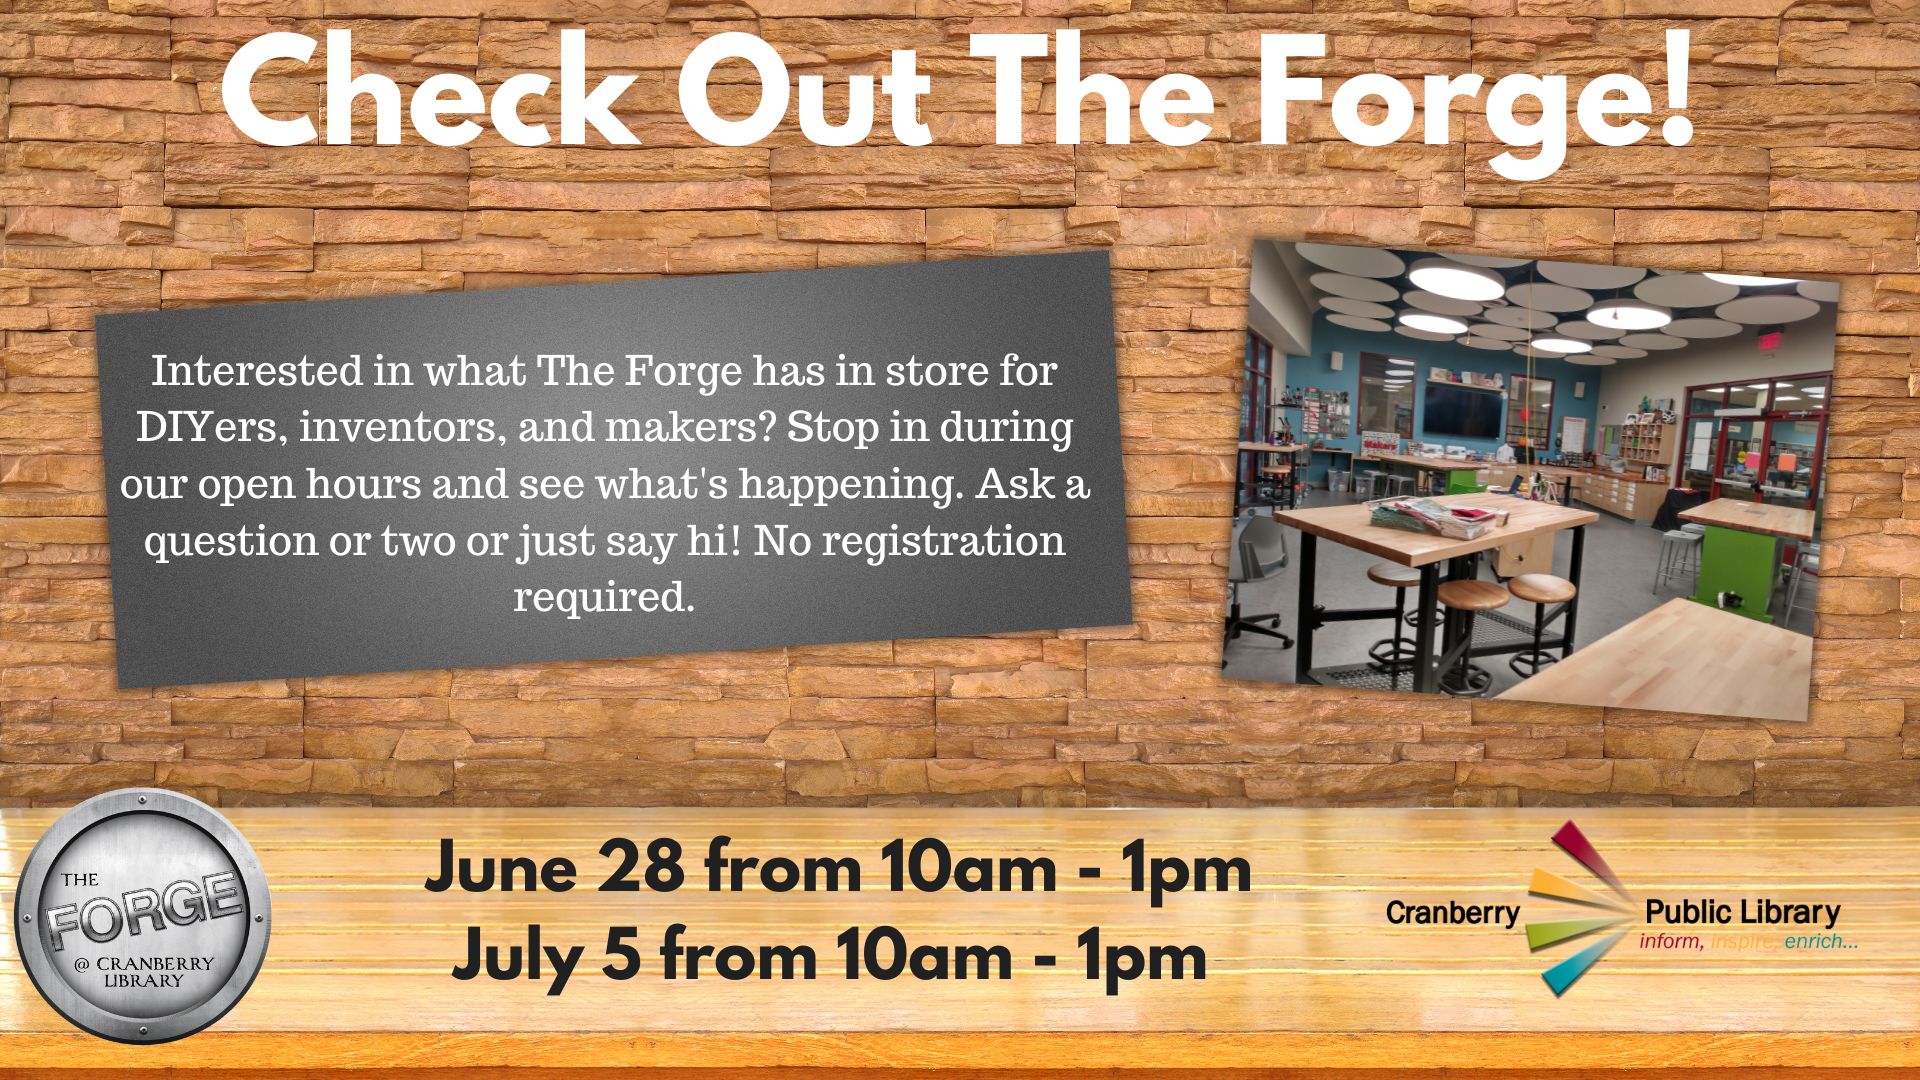 Flyer for Check Out the Forge open house